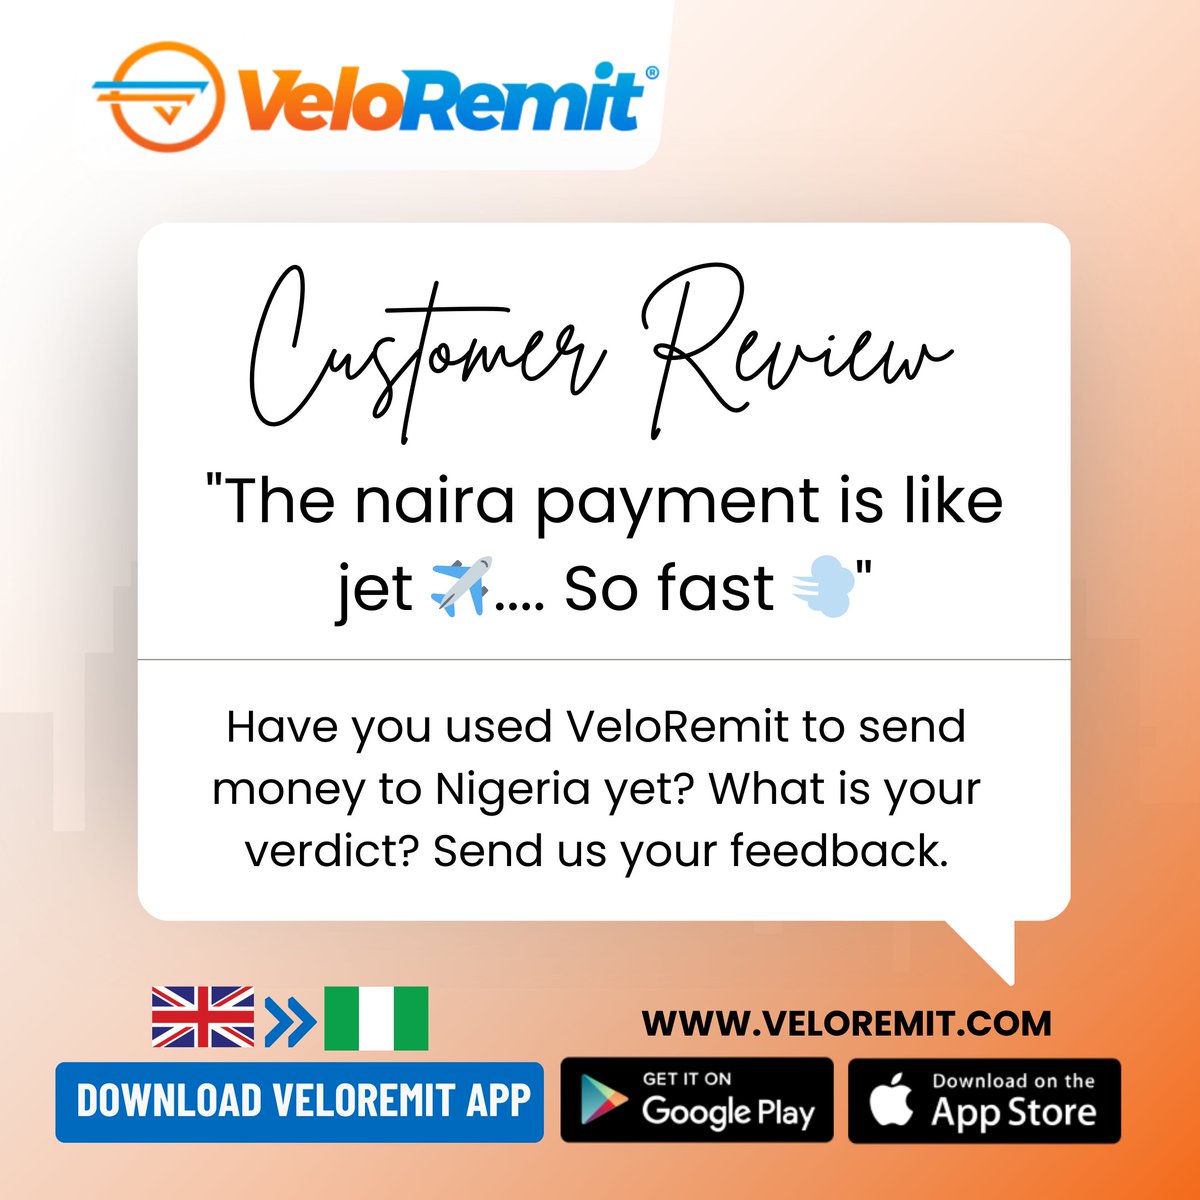 🚀 'The naira payment is like a jet ✈️... So fast 💨' - Another satisfied customer!🌟 What's our verdict? 💸 Share your experience with us! 🇬🇧🇳🇬#veloremit #etioba_velo✅ #Review #fasttransfers #shareyourexperience #bestrates #uktonigeria #moneytransferapp #NaijaNews #downloadnow